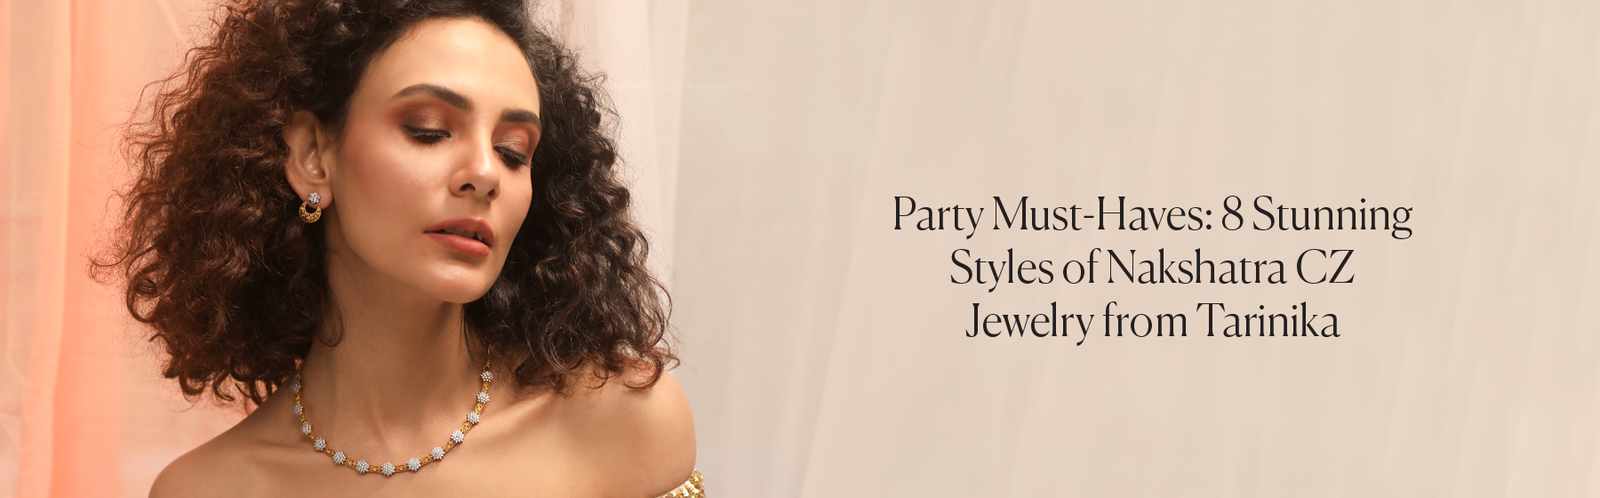 Party Must-Haves: 8 Different Styles of Nakshatra CZ Jewelry from Tarinika